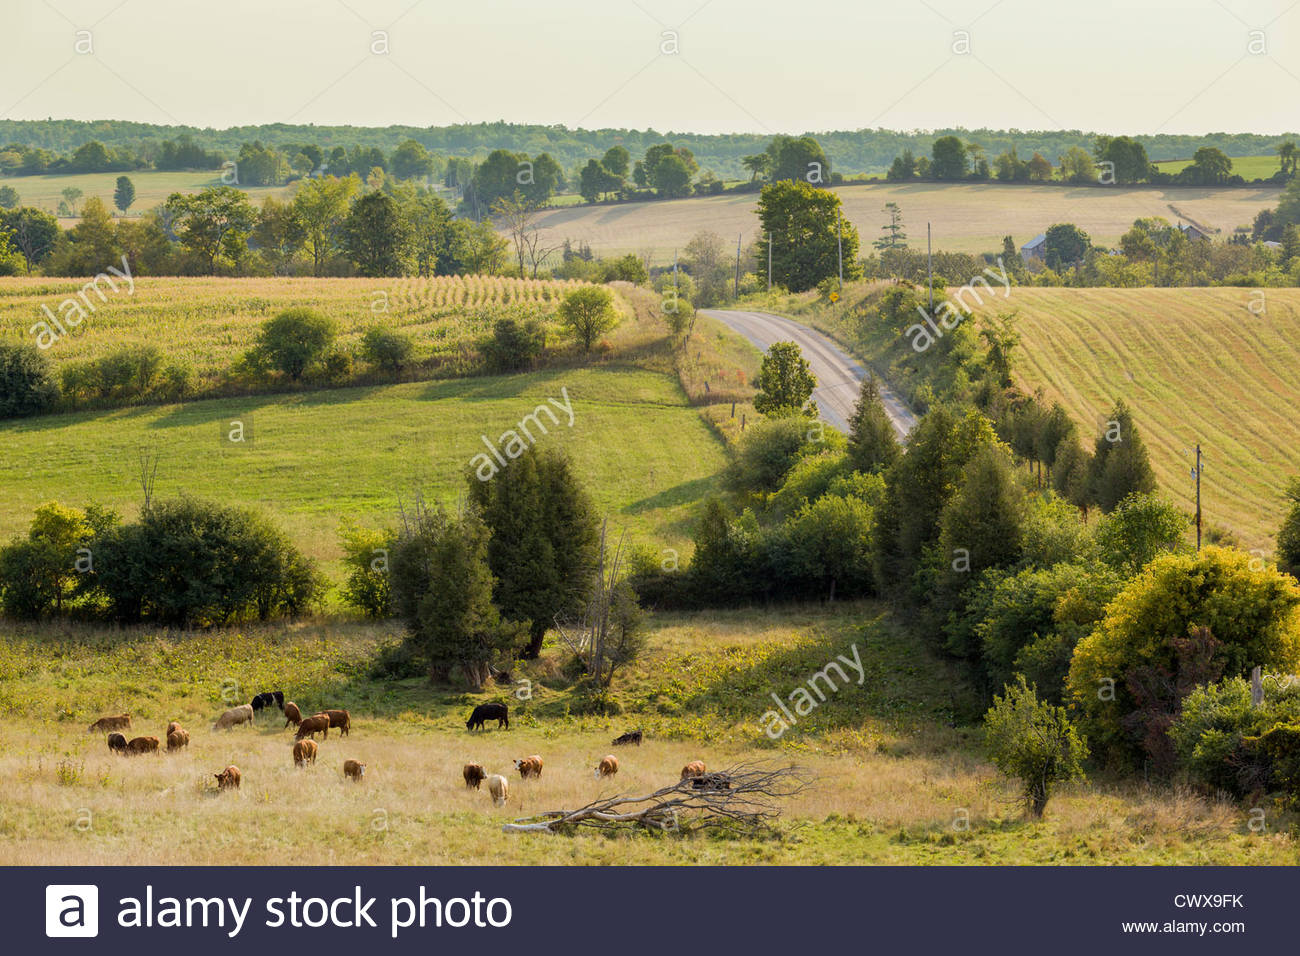 Farm_and_cattle_on_the_drumlins_created_